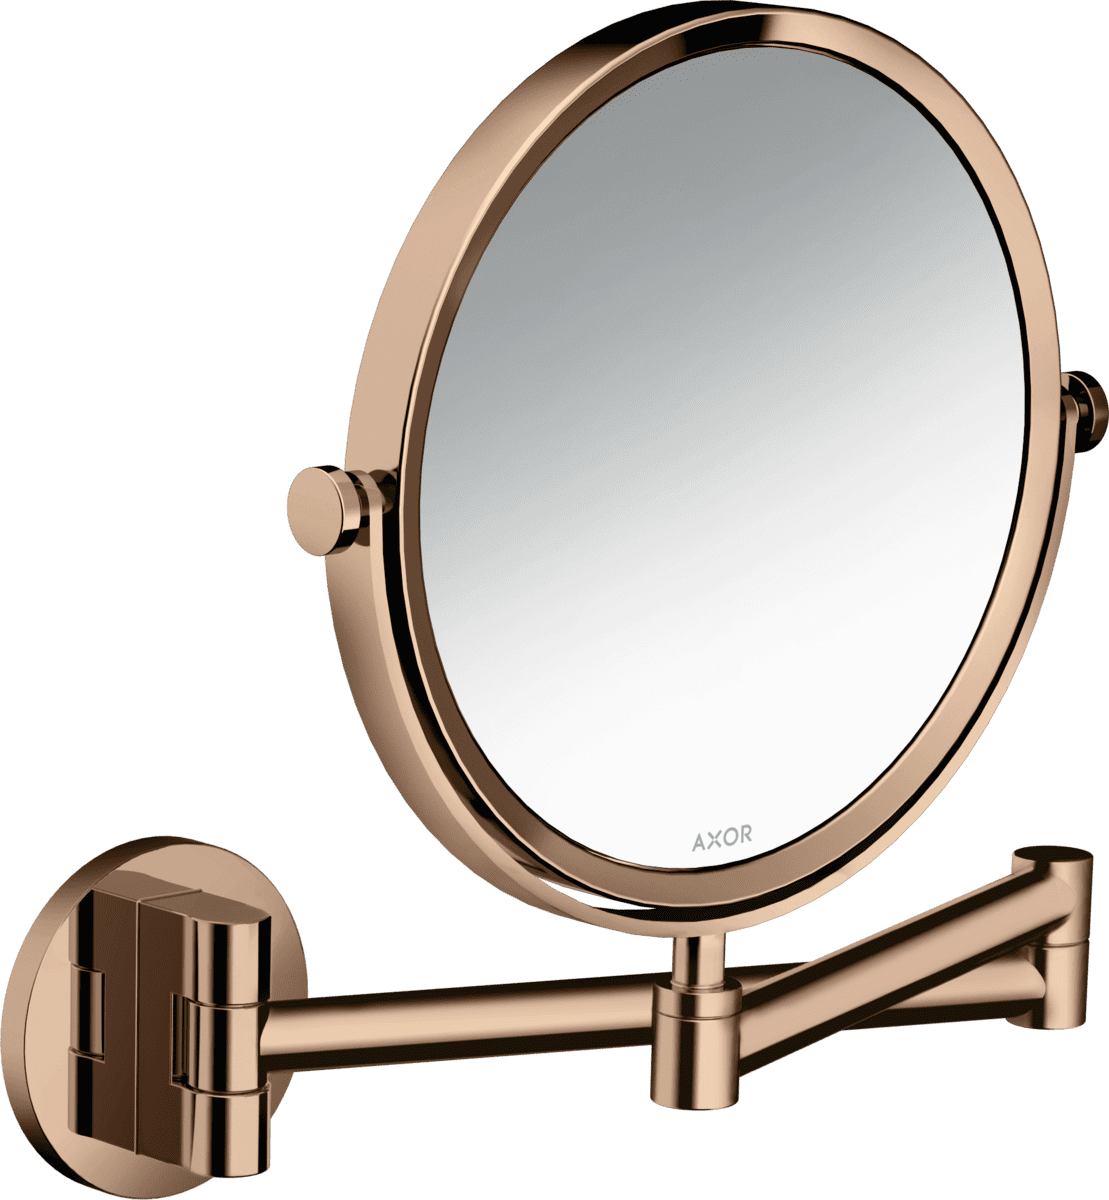 Picture of HANSGROHE AXOR Universal Circular Shaving mirror #42849300 - Polished Red Gold